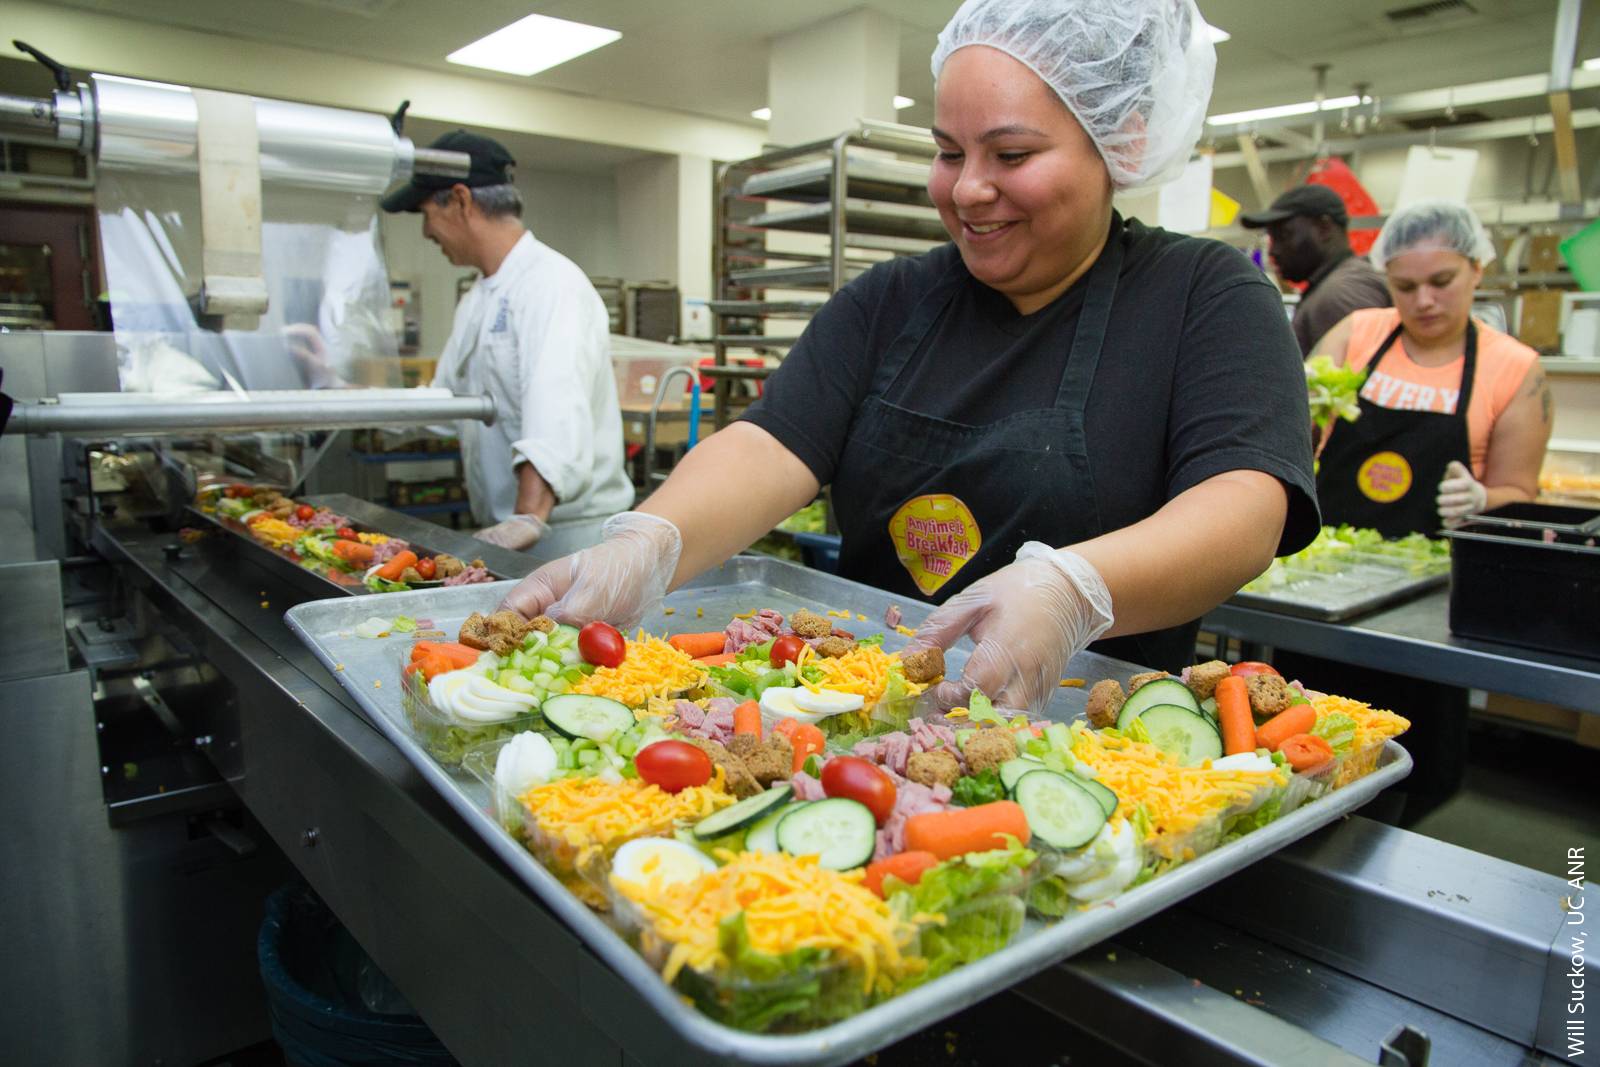 Workers prepare fresh salads in the Davis Joint Unified School District central kitchen. Although direct sales can help growers expand their markets and in some cases receive higher prices, developing long-term purchasing relationships with school food service buyers has remained a challenge.